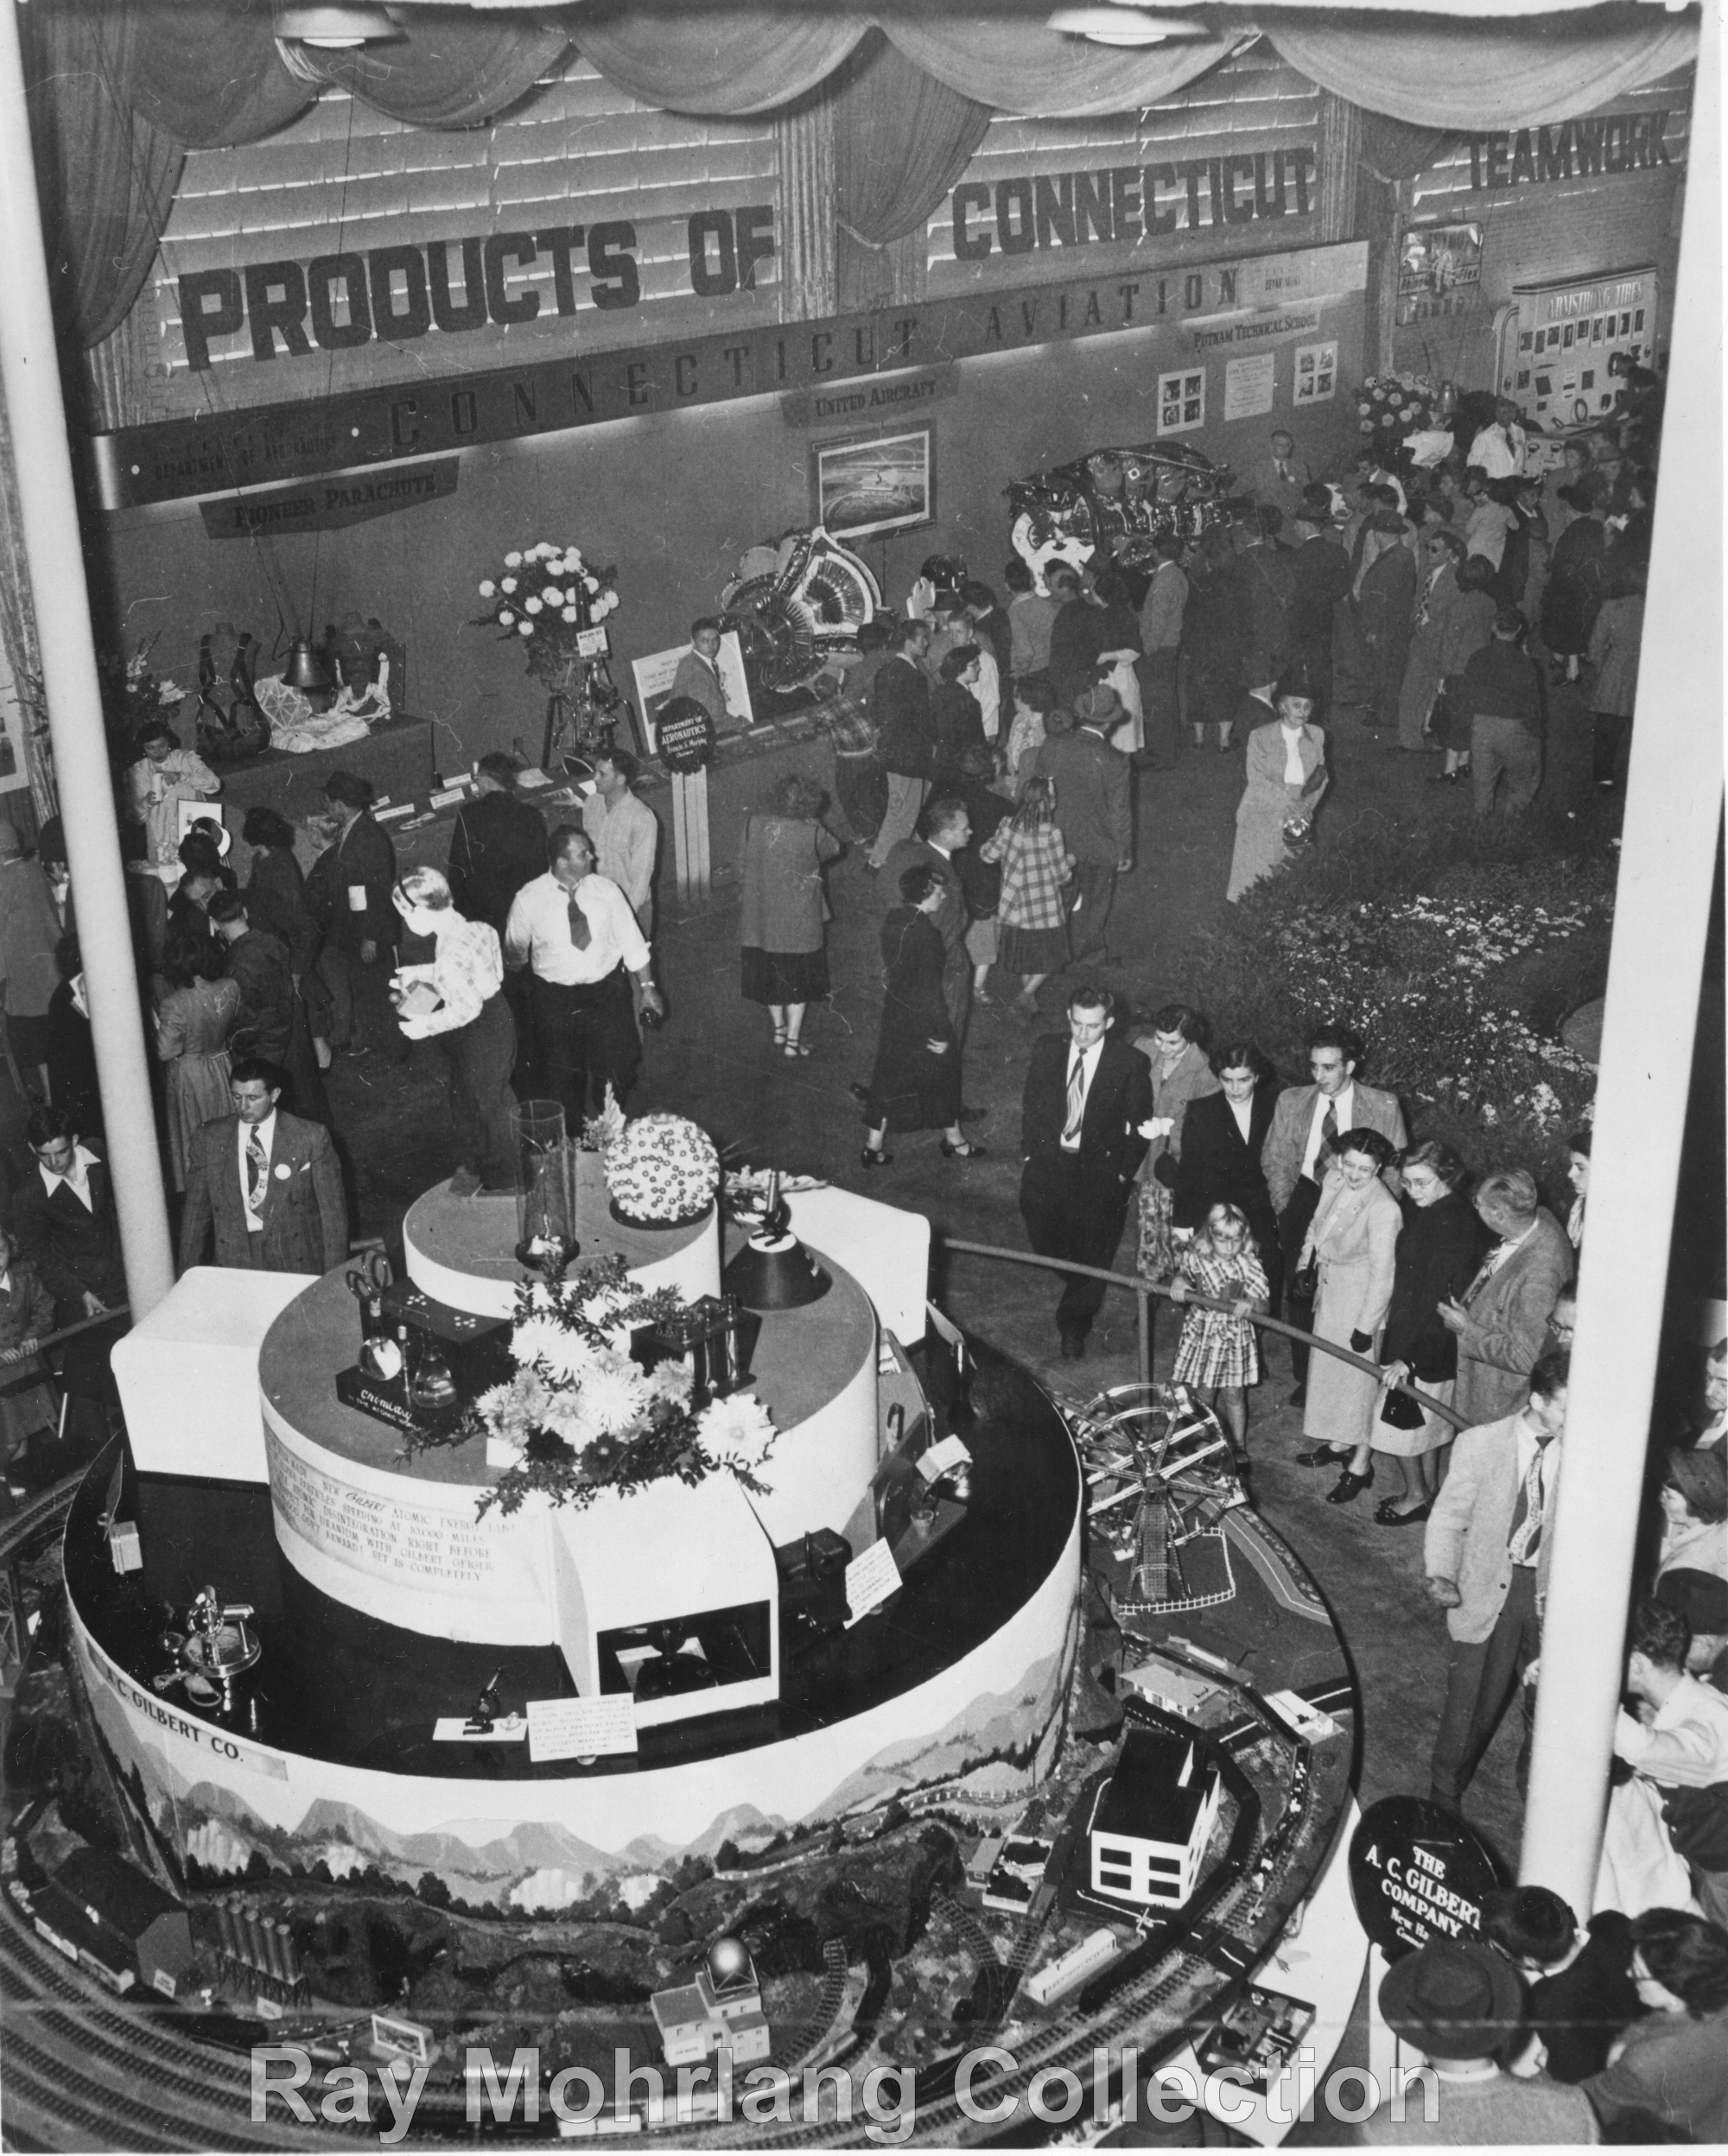 1959 Train Exhibit at Eastern States Exposition